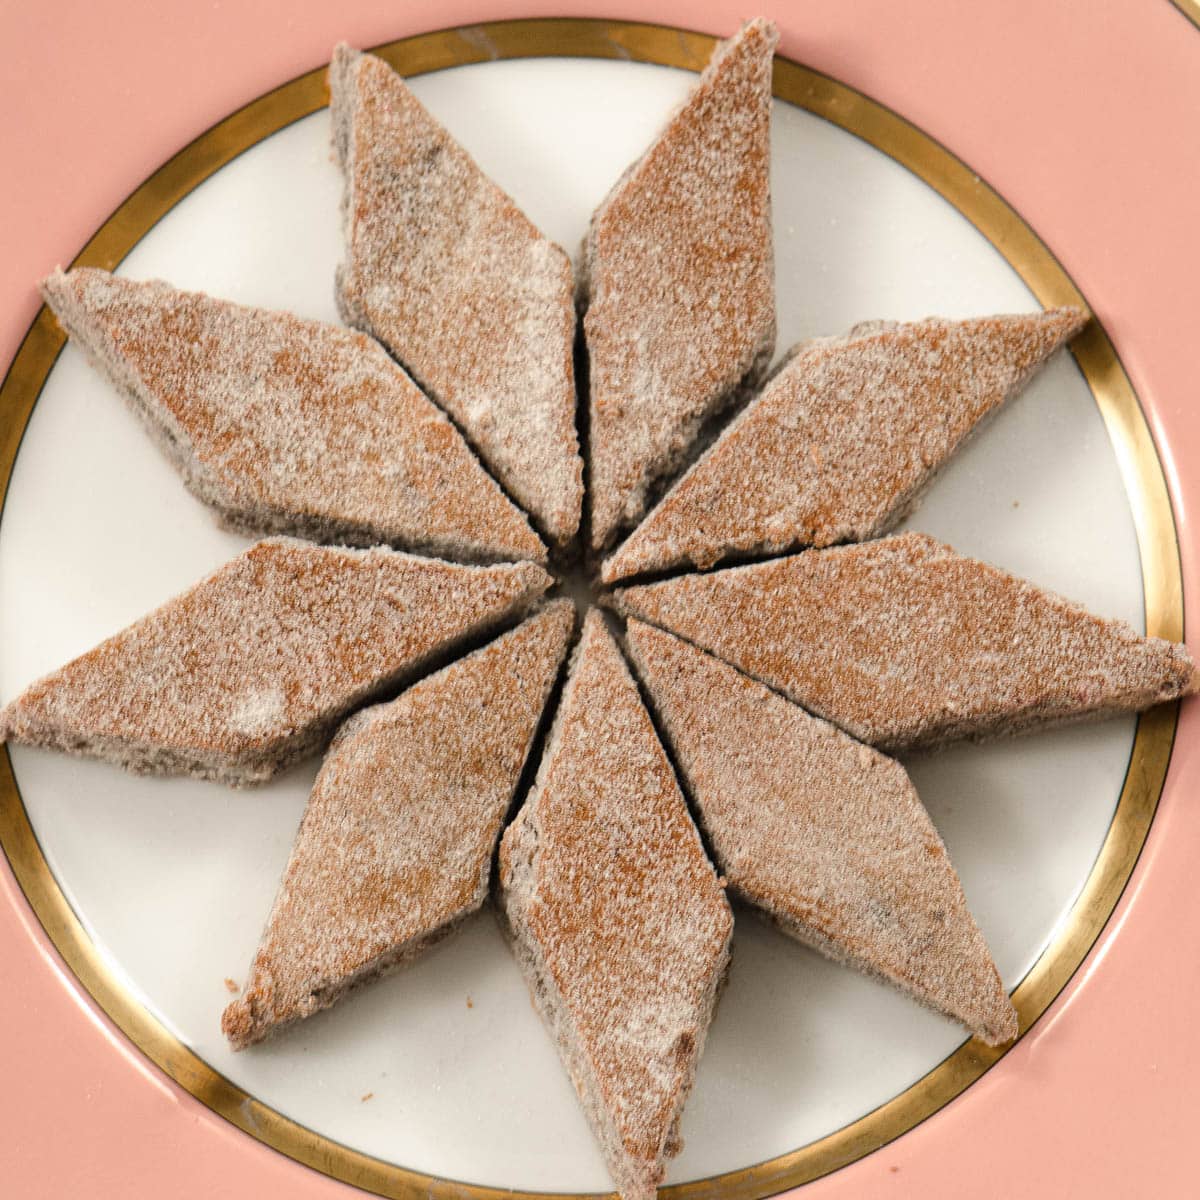 Honey diamonds are a rare cookie with no shortening but chocolate, honey and spices.